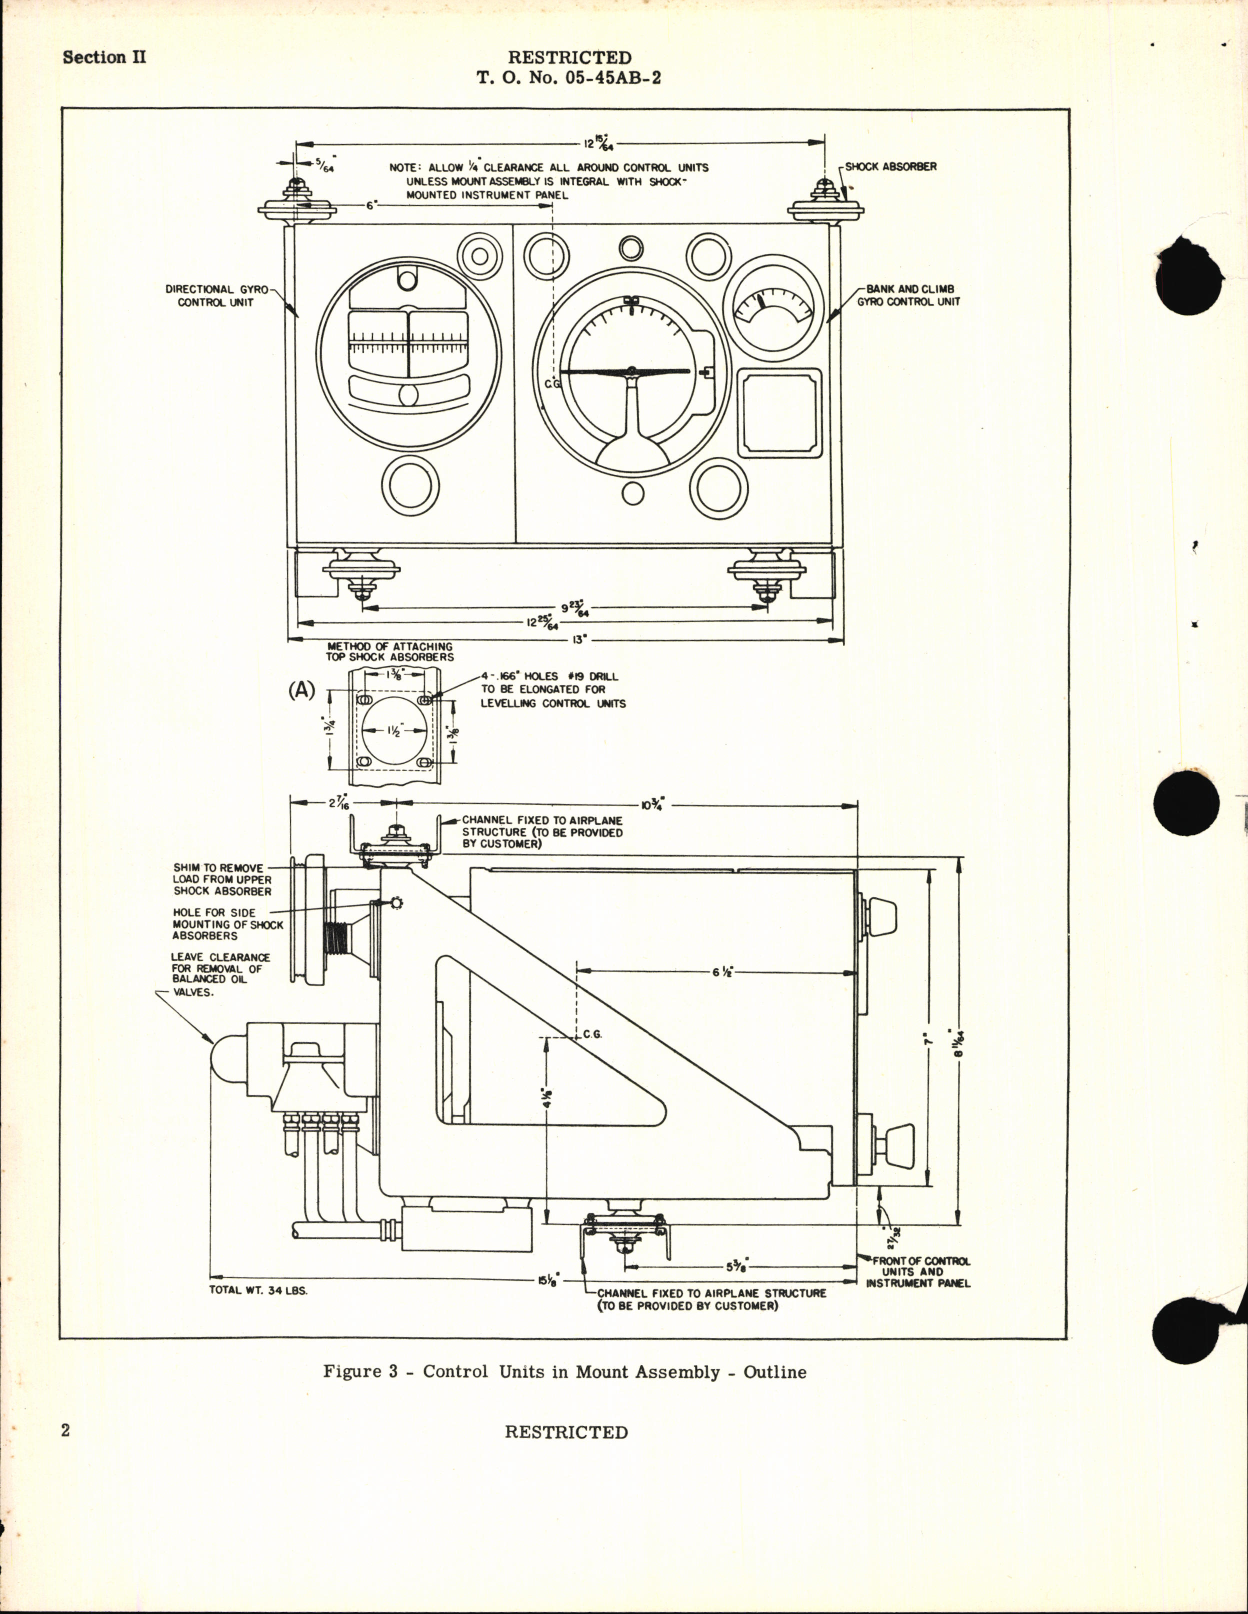 Sample page 10 from AirCorps Library document: Service Instructions for Automatic Pilot Type A-3